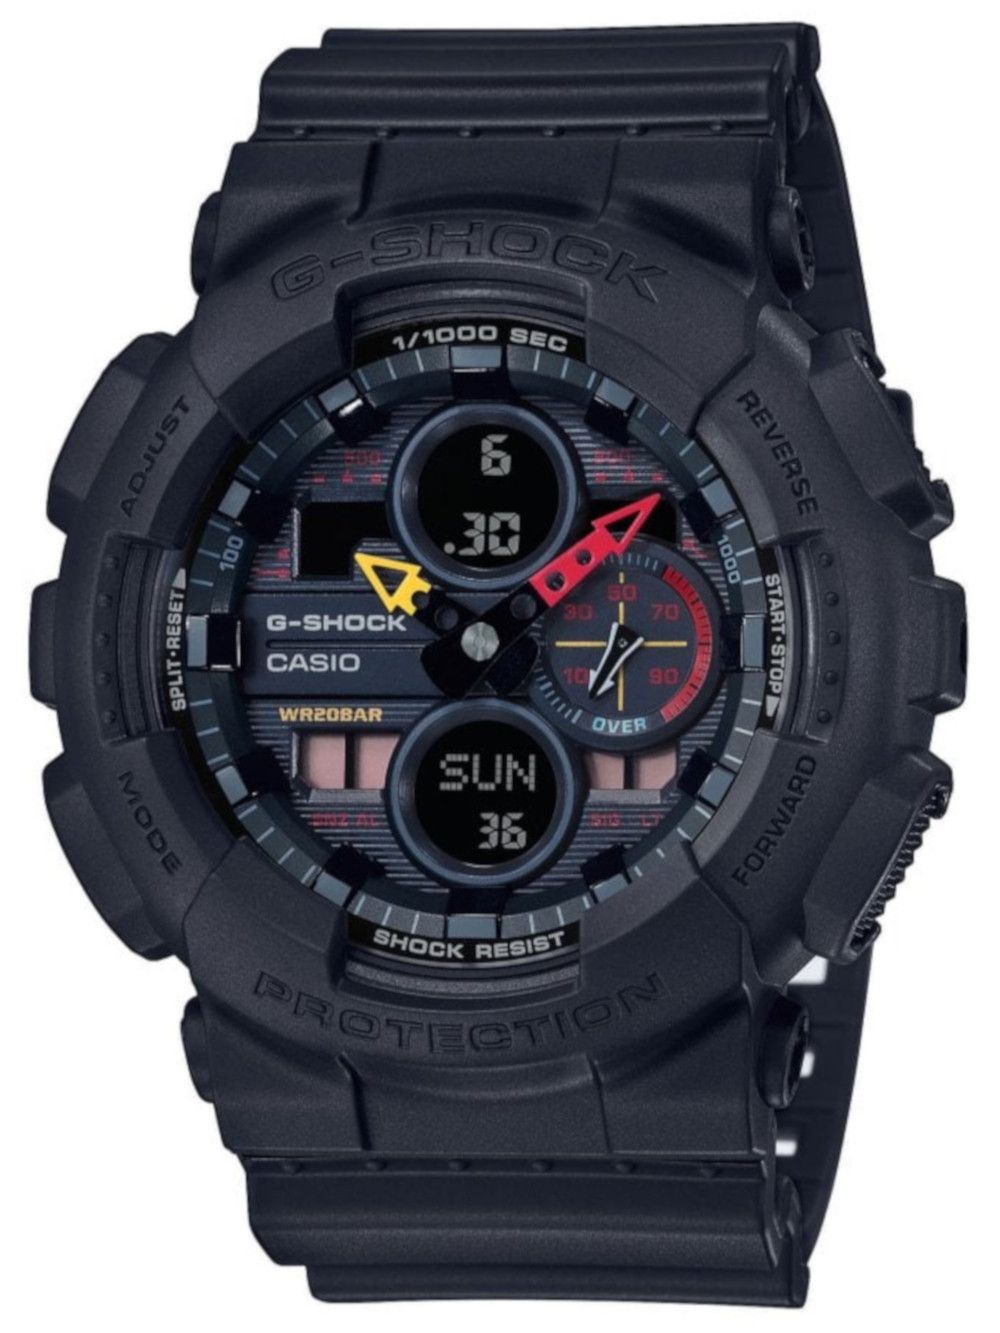 This Casio G-shock Analogue-Digital Watch for Men is the perfect timepiece to wear or to gift. It's Black 51 mm Round case combined with the comfortable Black Plastic will ensure you enjoy this stunning timepiece without any compromise. Operated by a high quality Quartz movement and water resistant to 20 bars, your watch will keep ticking. Stylish- Sporty and a modern design, very suitable for Men -The watch has a calendar function: Day-Date, Worldtime, Stop Watch, Timer, Alarm, Light High quality 21 cm length, 28 mm wide, Black Plastic strap with a Buckle Case diameter: 51 mm, Case height: 14 mm and Case color: Black Dial color: Black